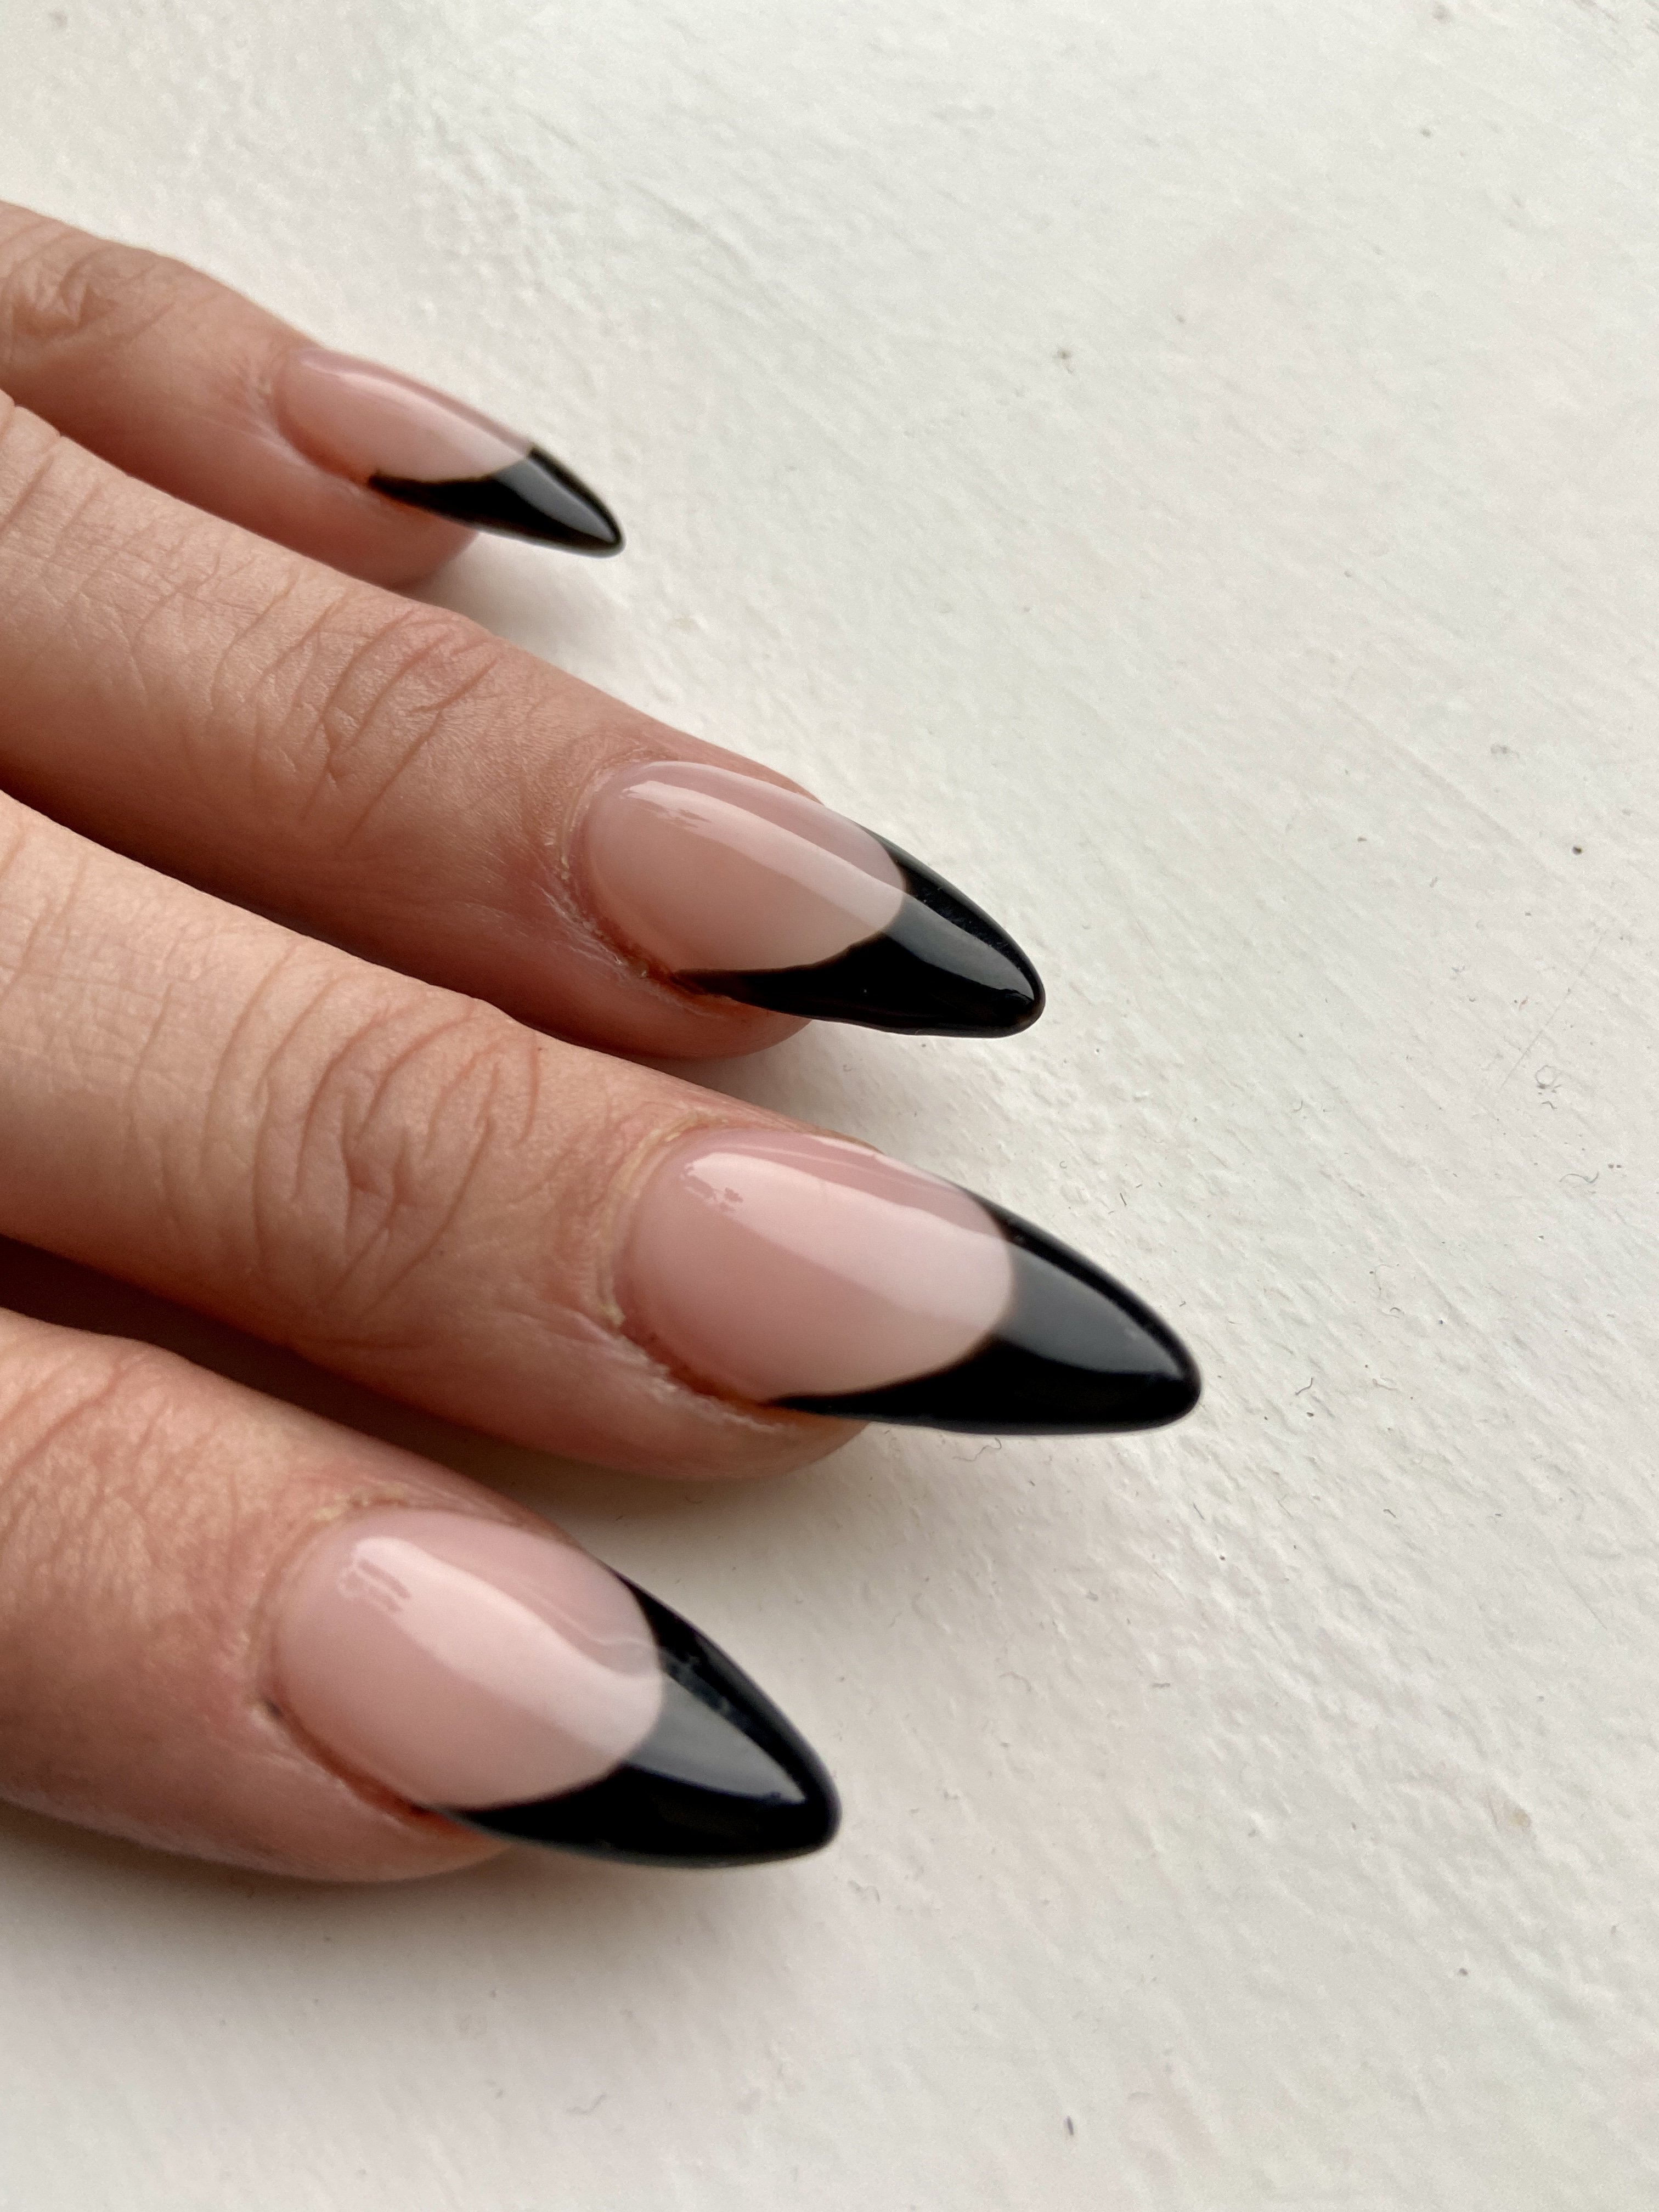 Black French tip manicure. | Source: Getty Images